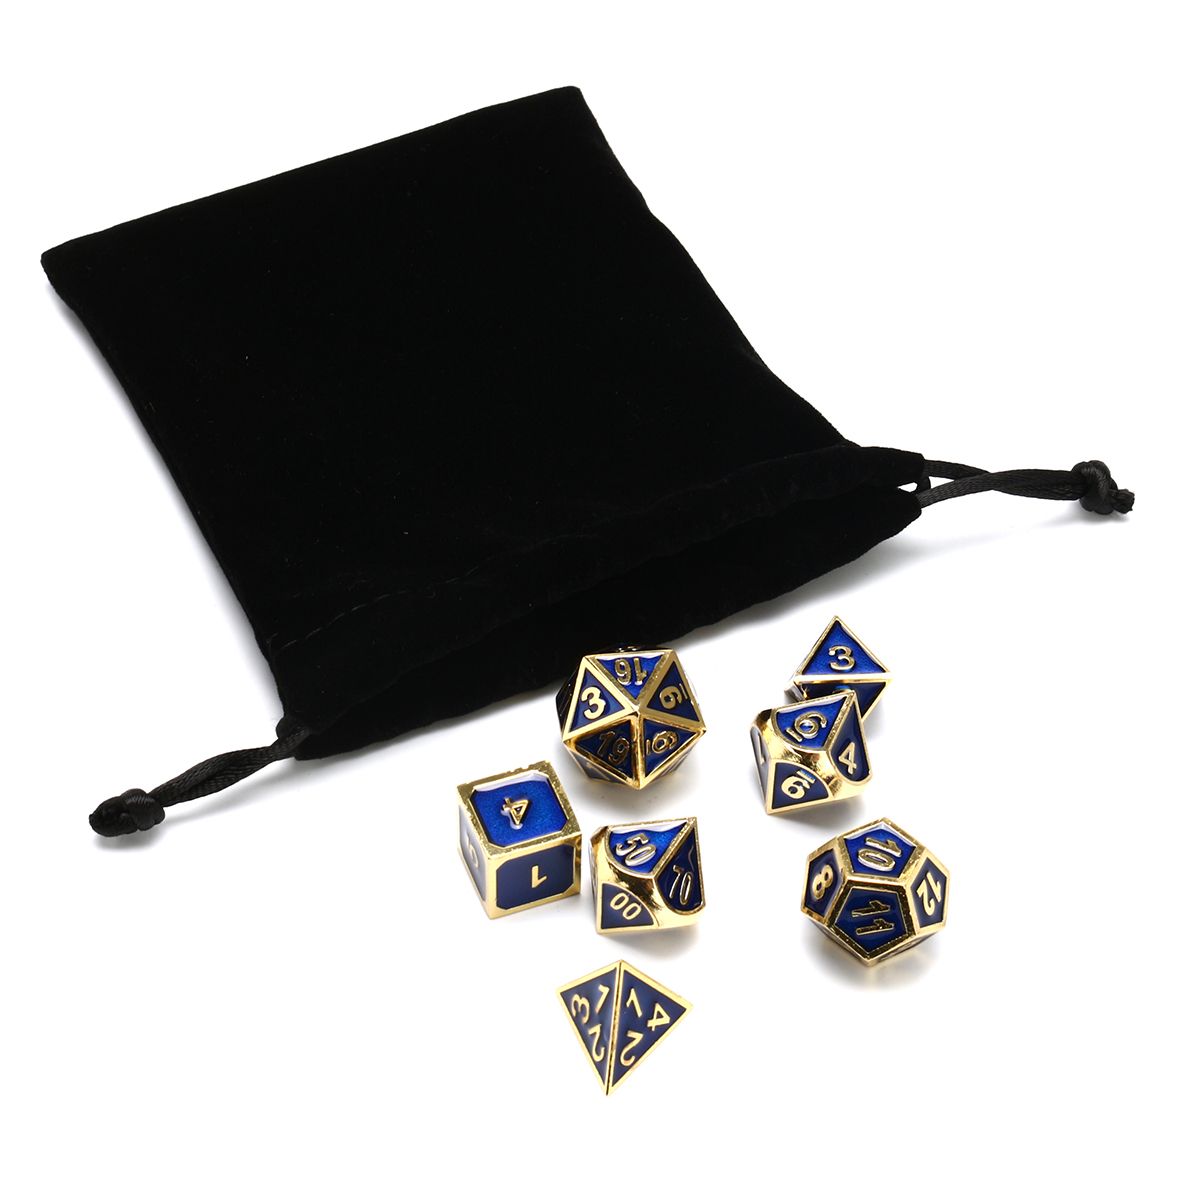 Antique-Color-Solid-Metal-Heavy-Dice-Set-Polyhedral-Dice-Role-Playing-Games-Dice-Gadget-RPG-1262933